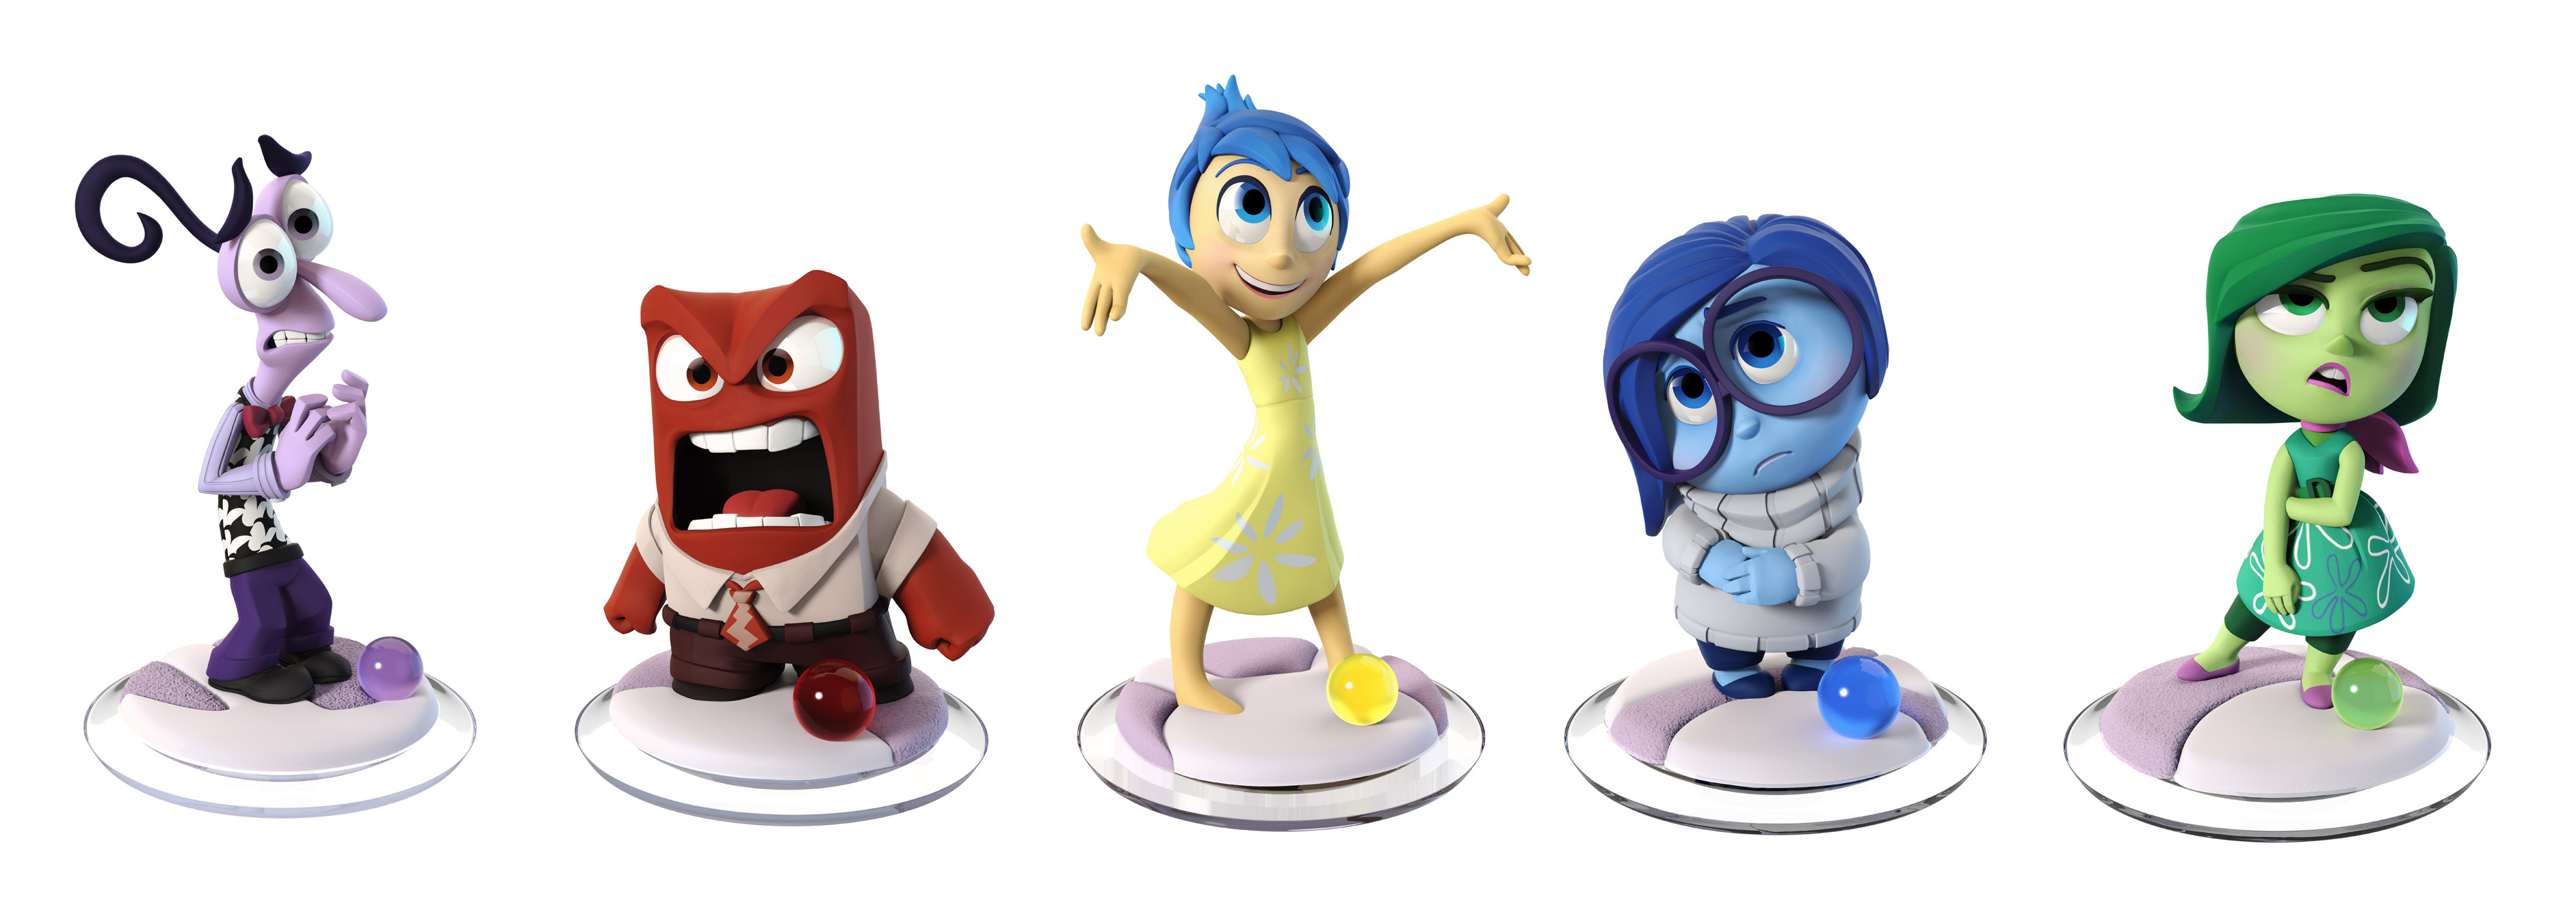 disney-infinity-3-0-turns-inside-out-into-a-dynamic-platformer-tech-times